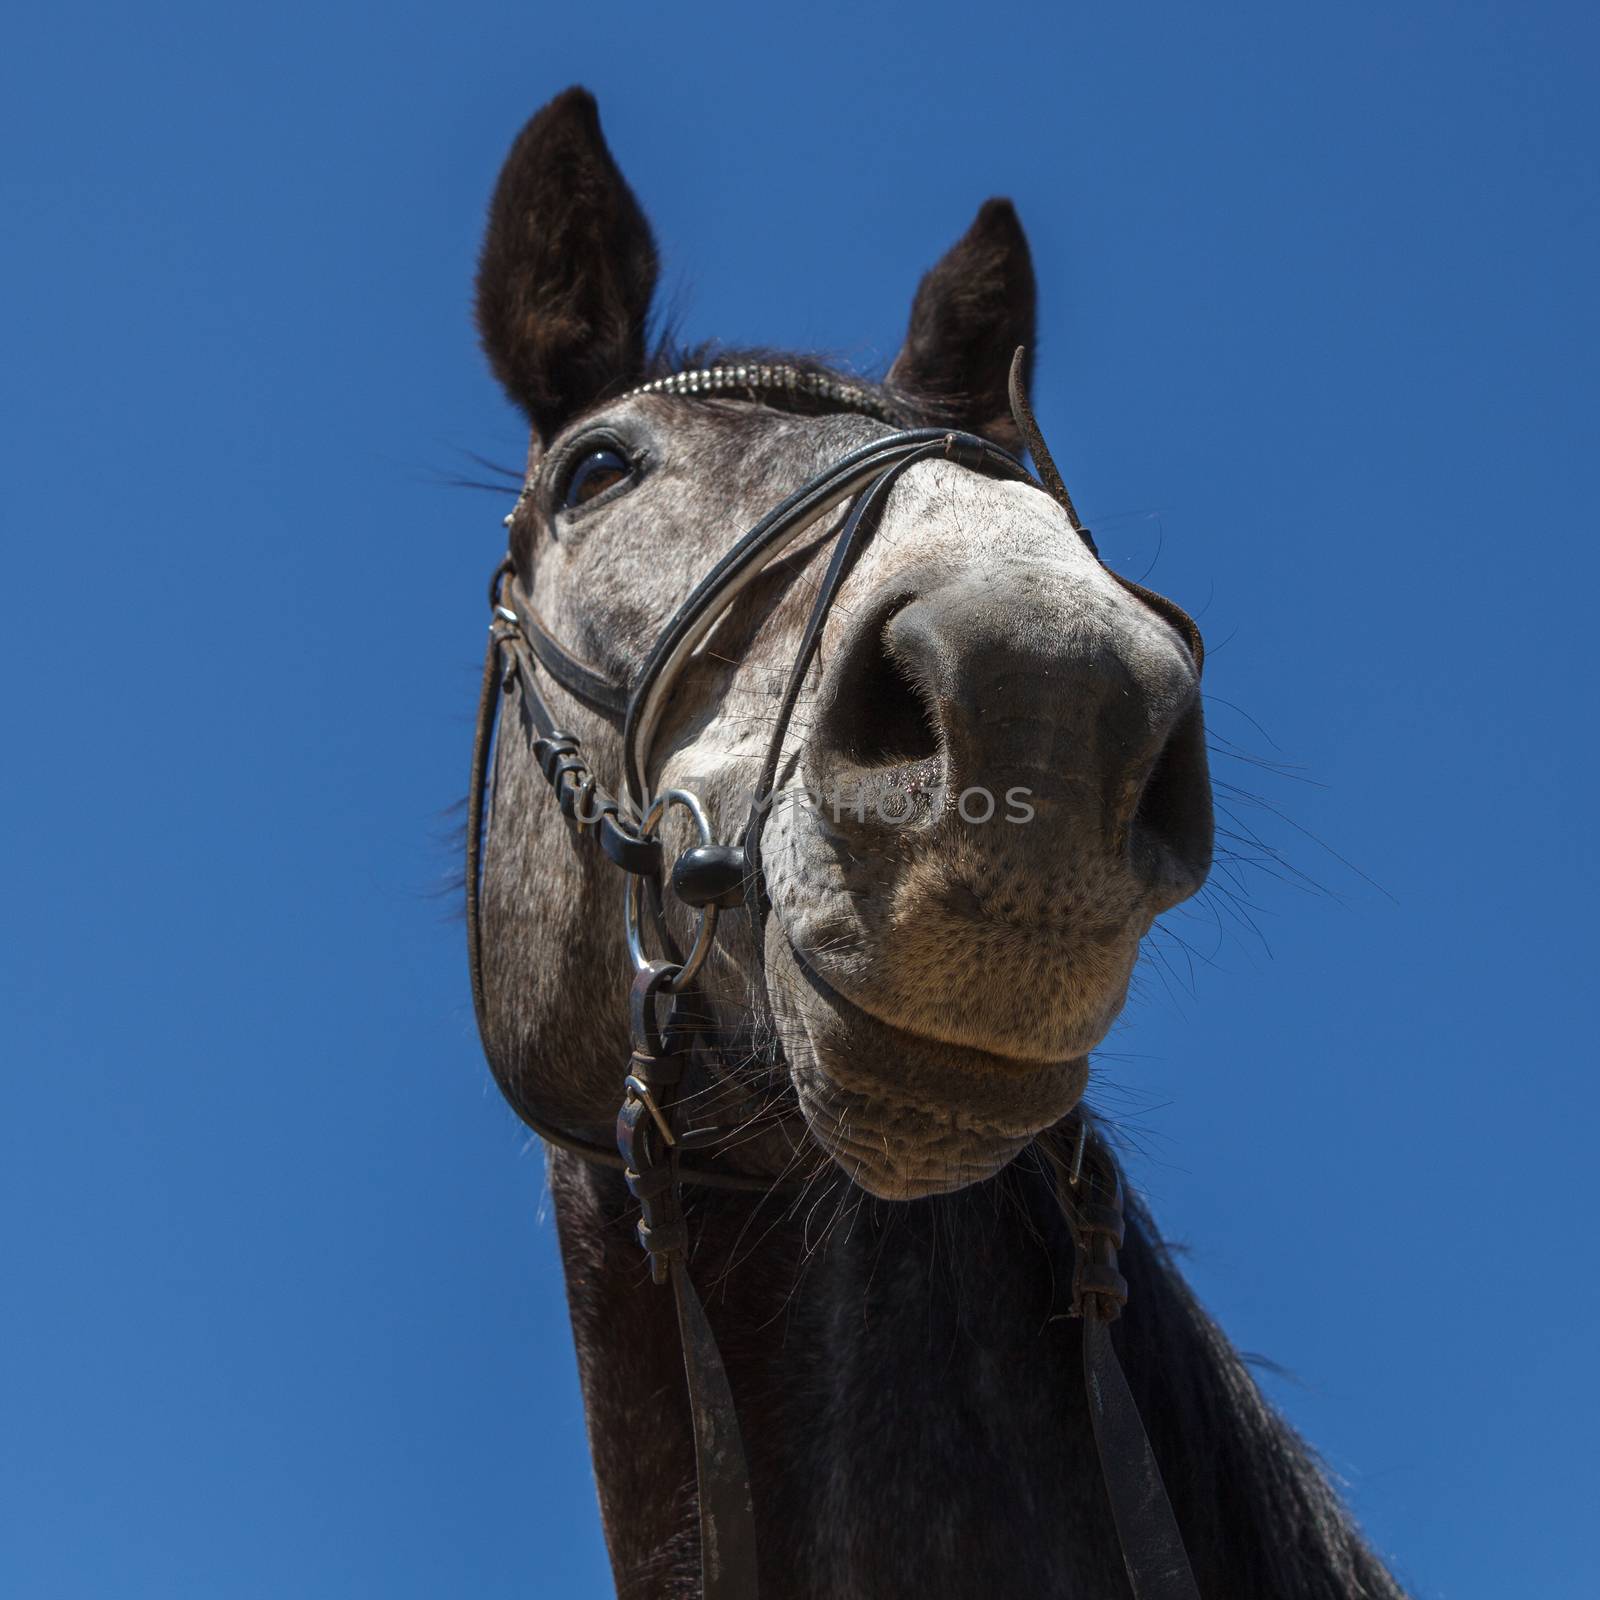 A smiling horse with dark eyes and big ears